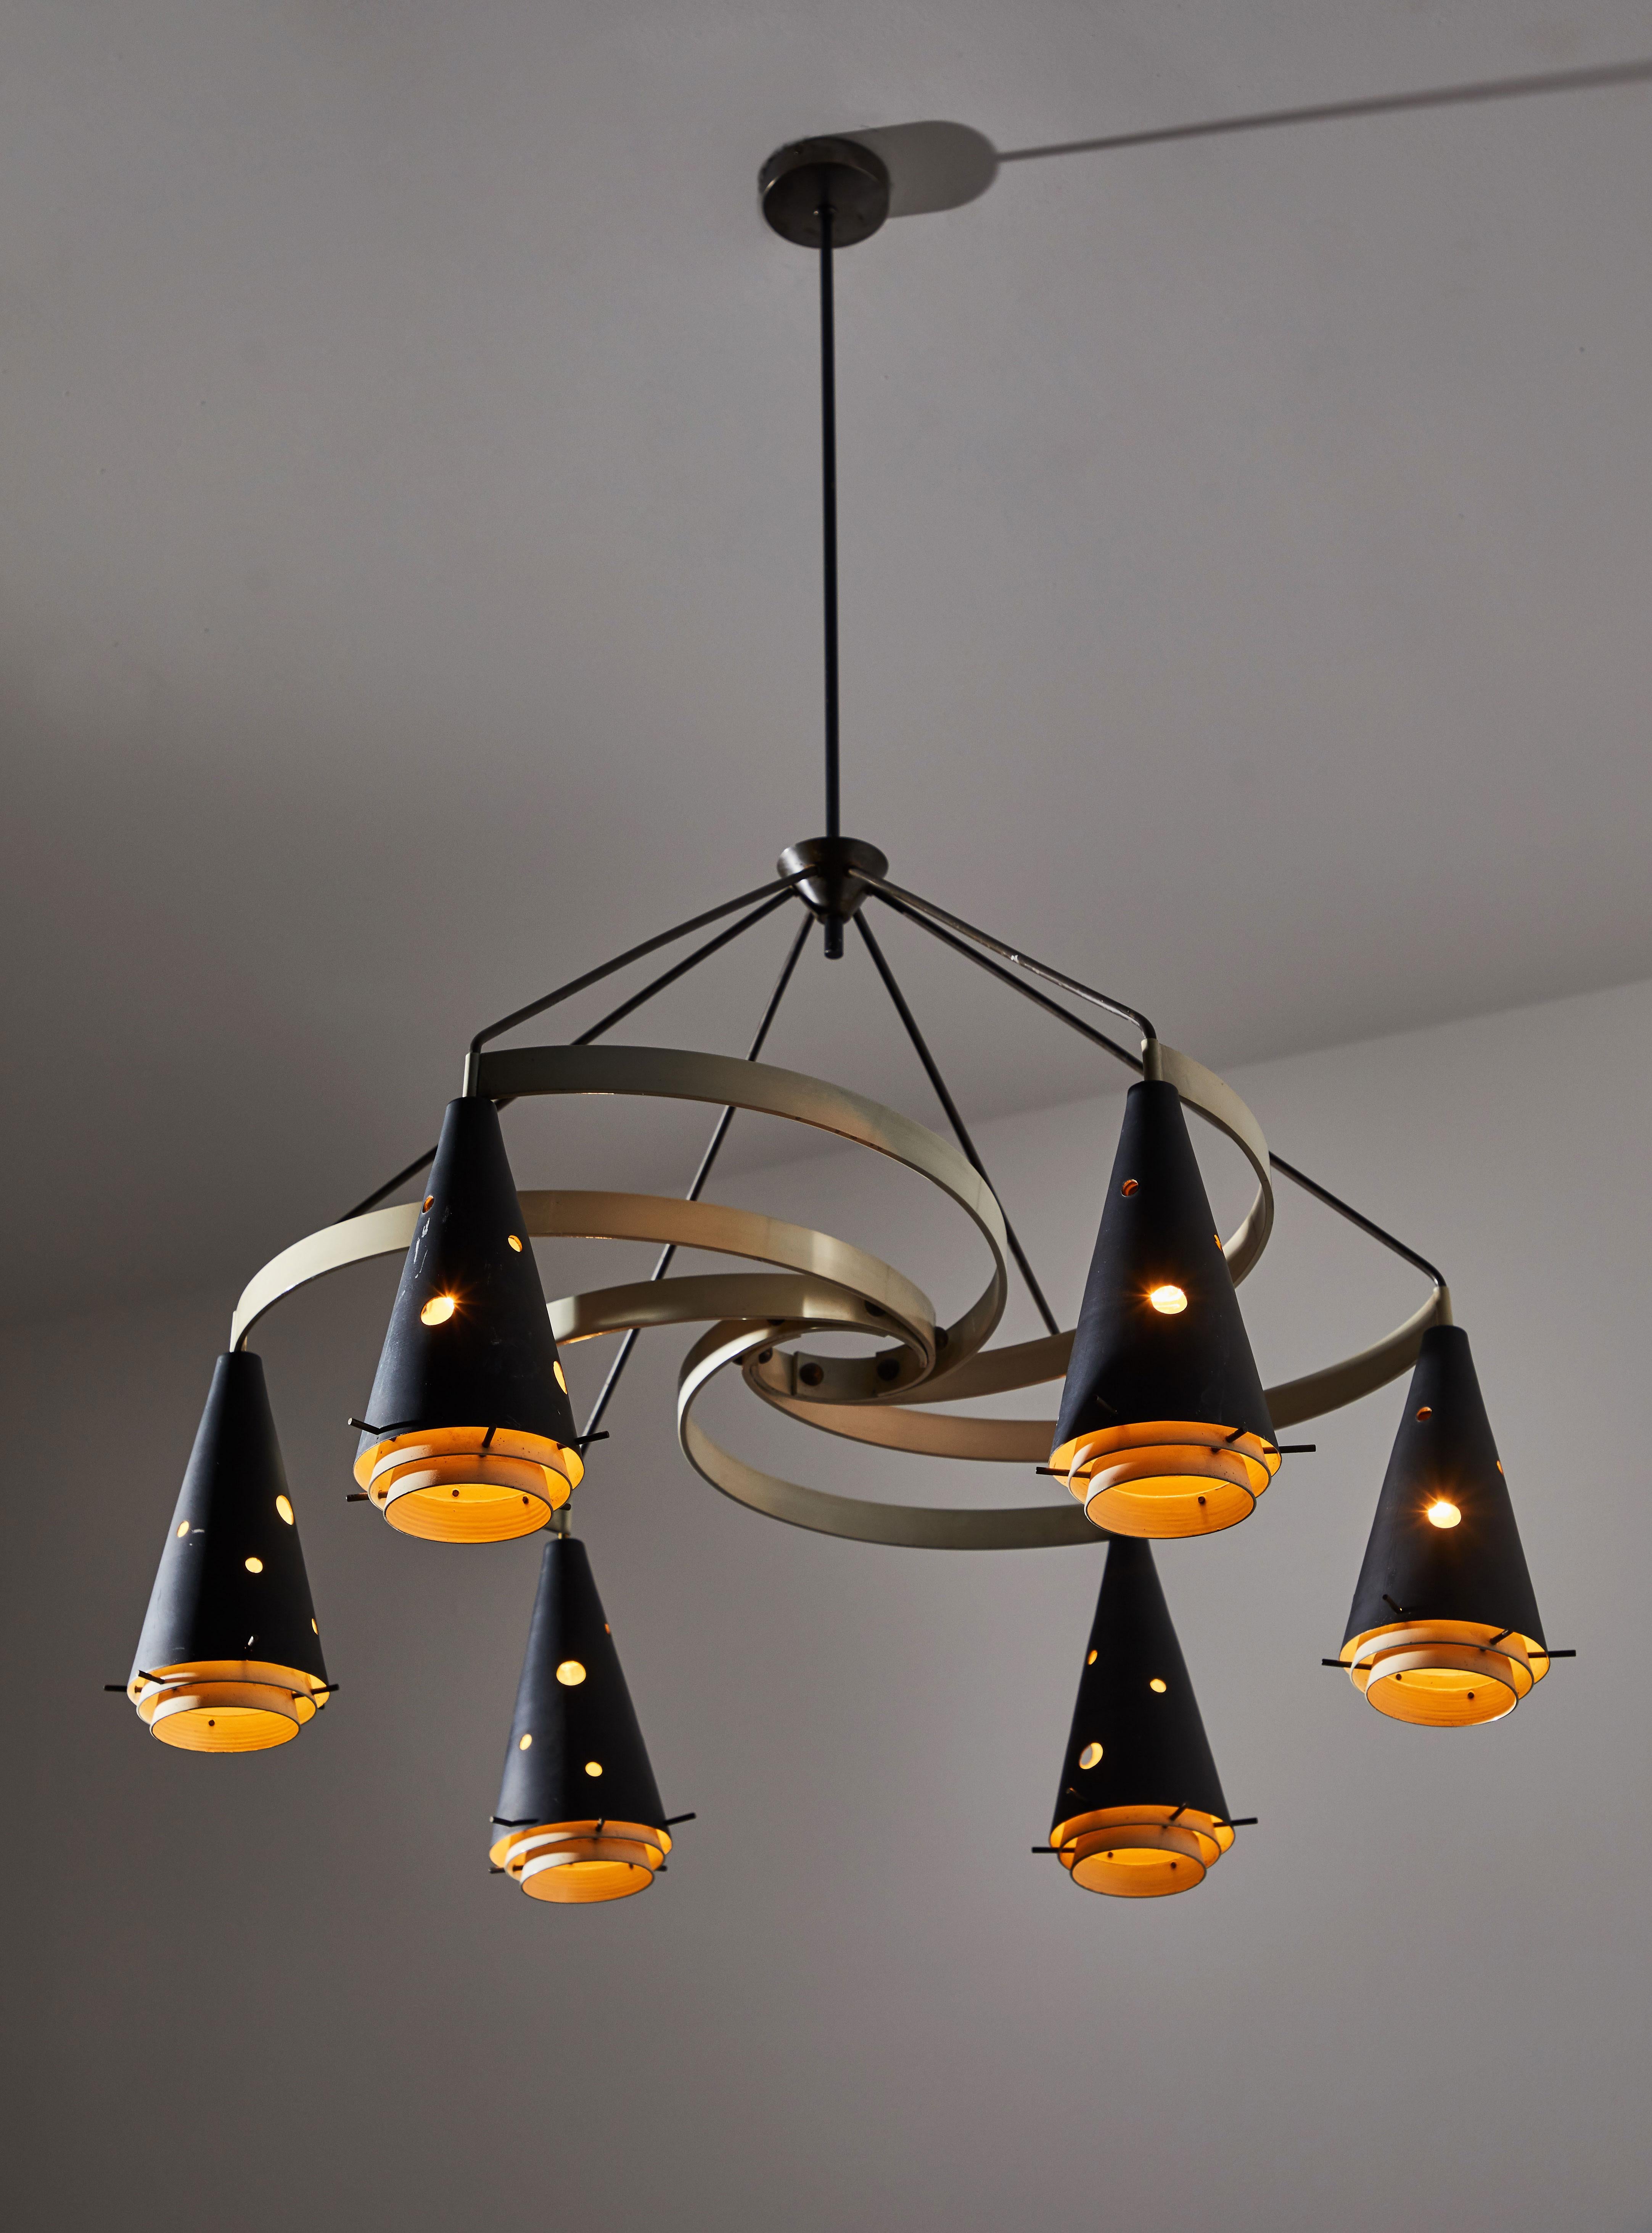 Chandelier by Gilardi & Barzaghi. Designed and manufactured in Italy circa 1950s. Enameled metal, brass. Original canopy. Rewired for US junction boxes. Takes six E26 40w maximum bulbs.